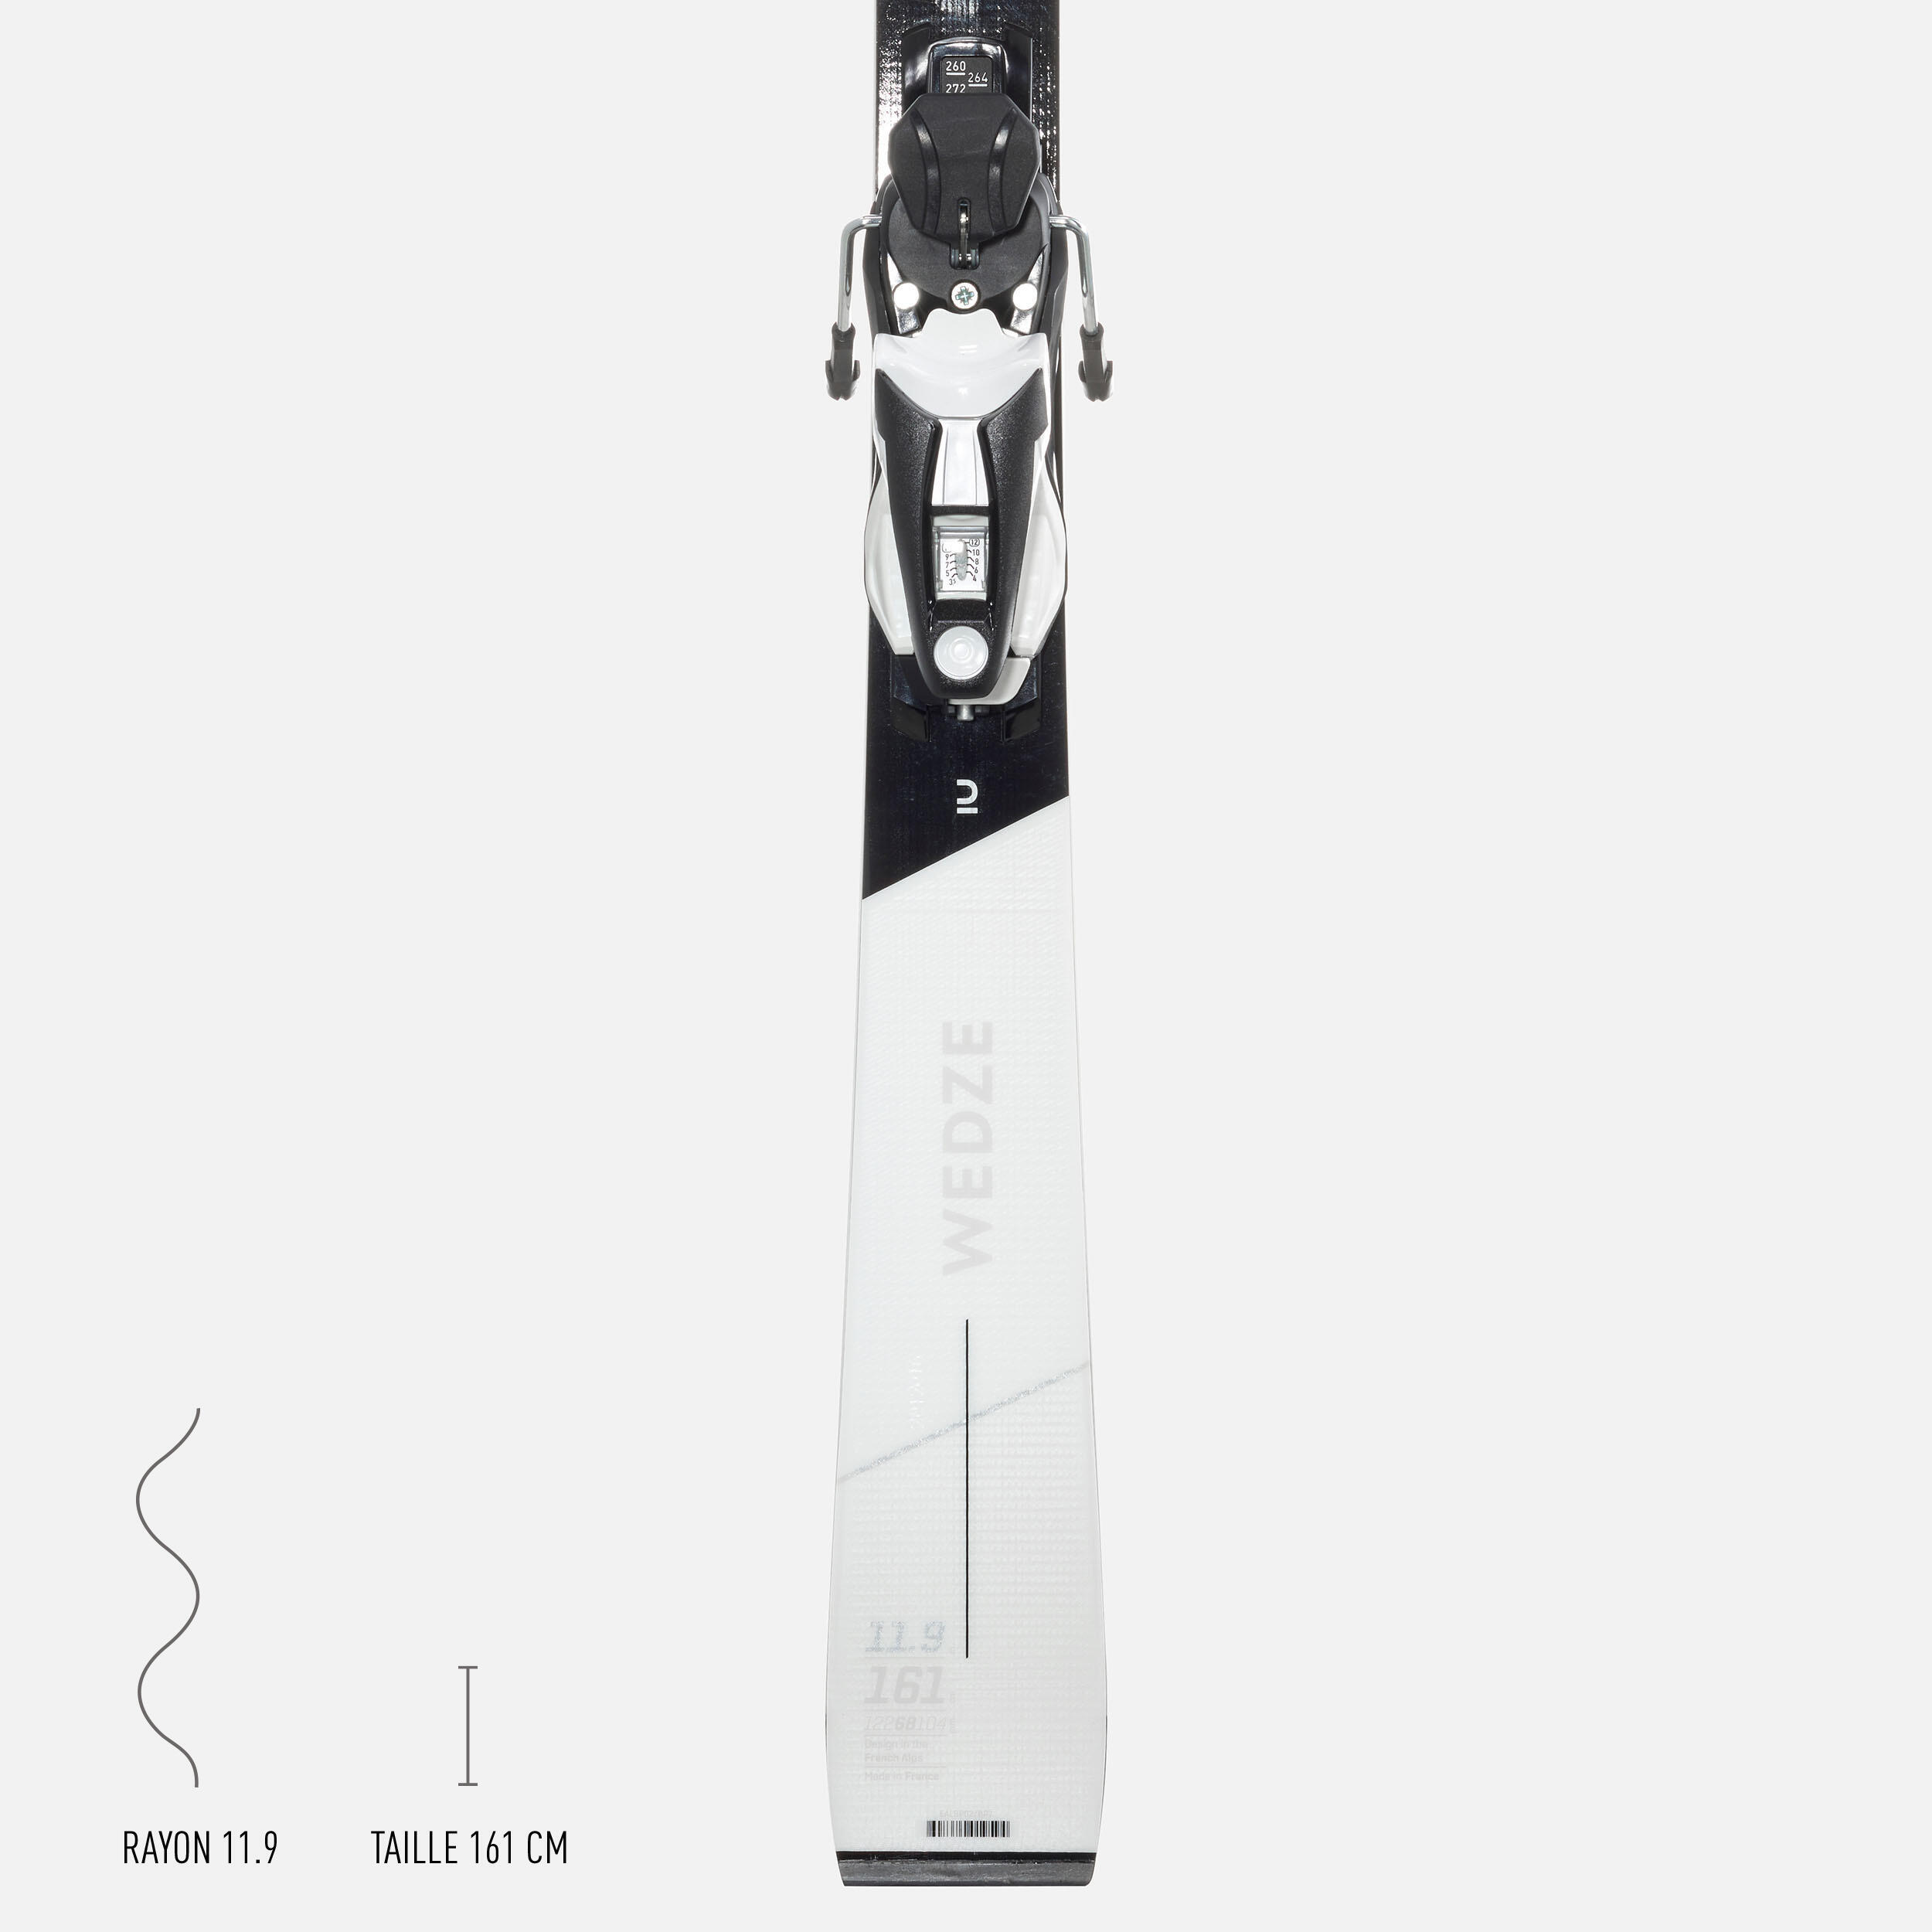 WOMEN’S ALPINE SKIS WITH BINDING - BOOST 900 R 19/23